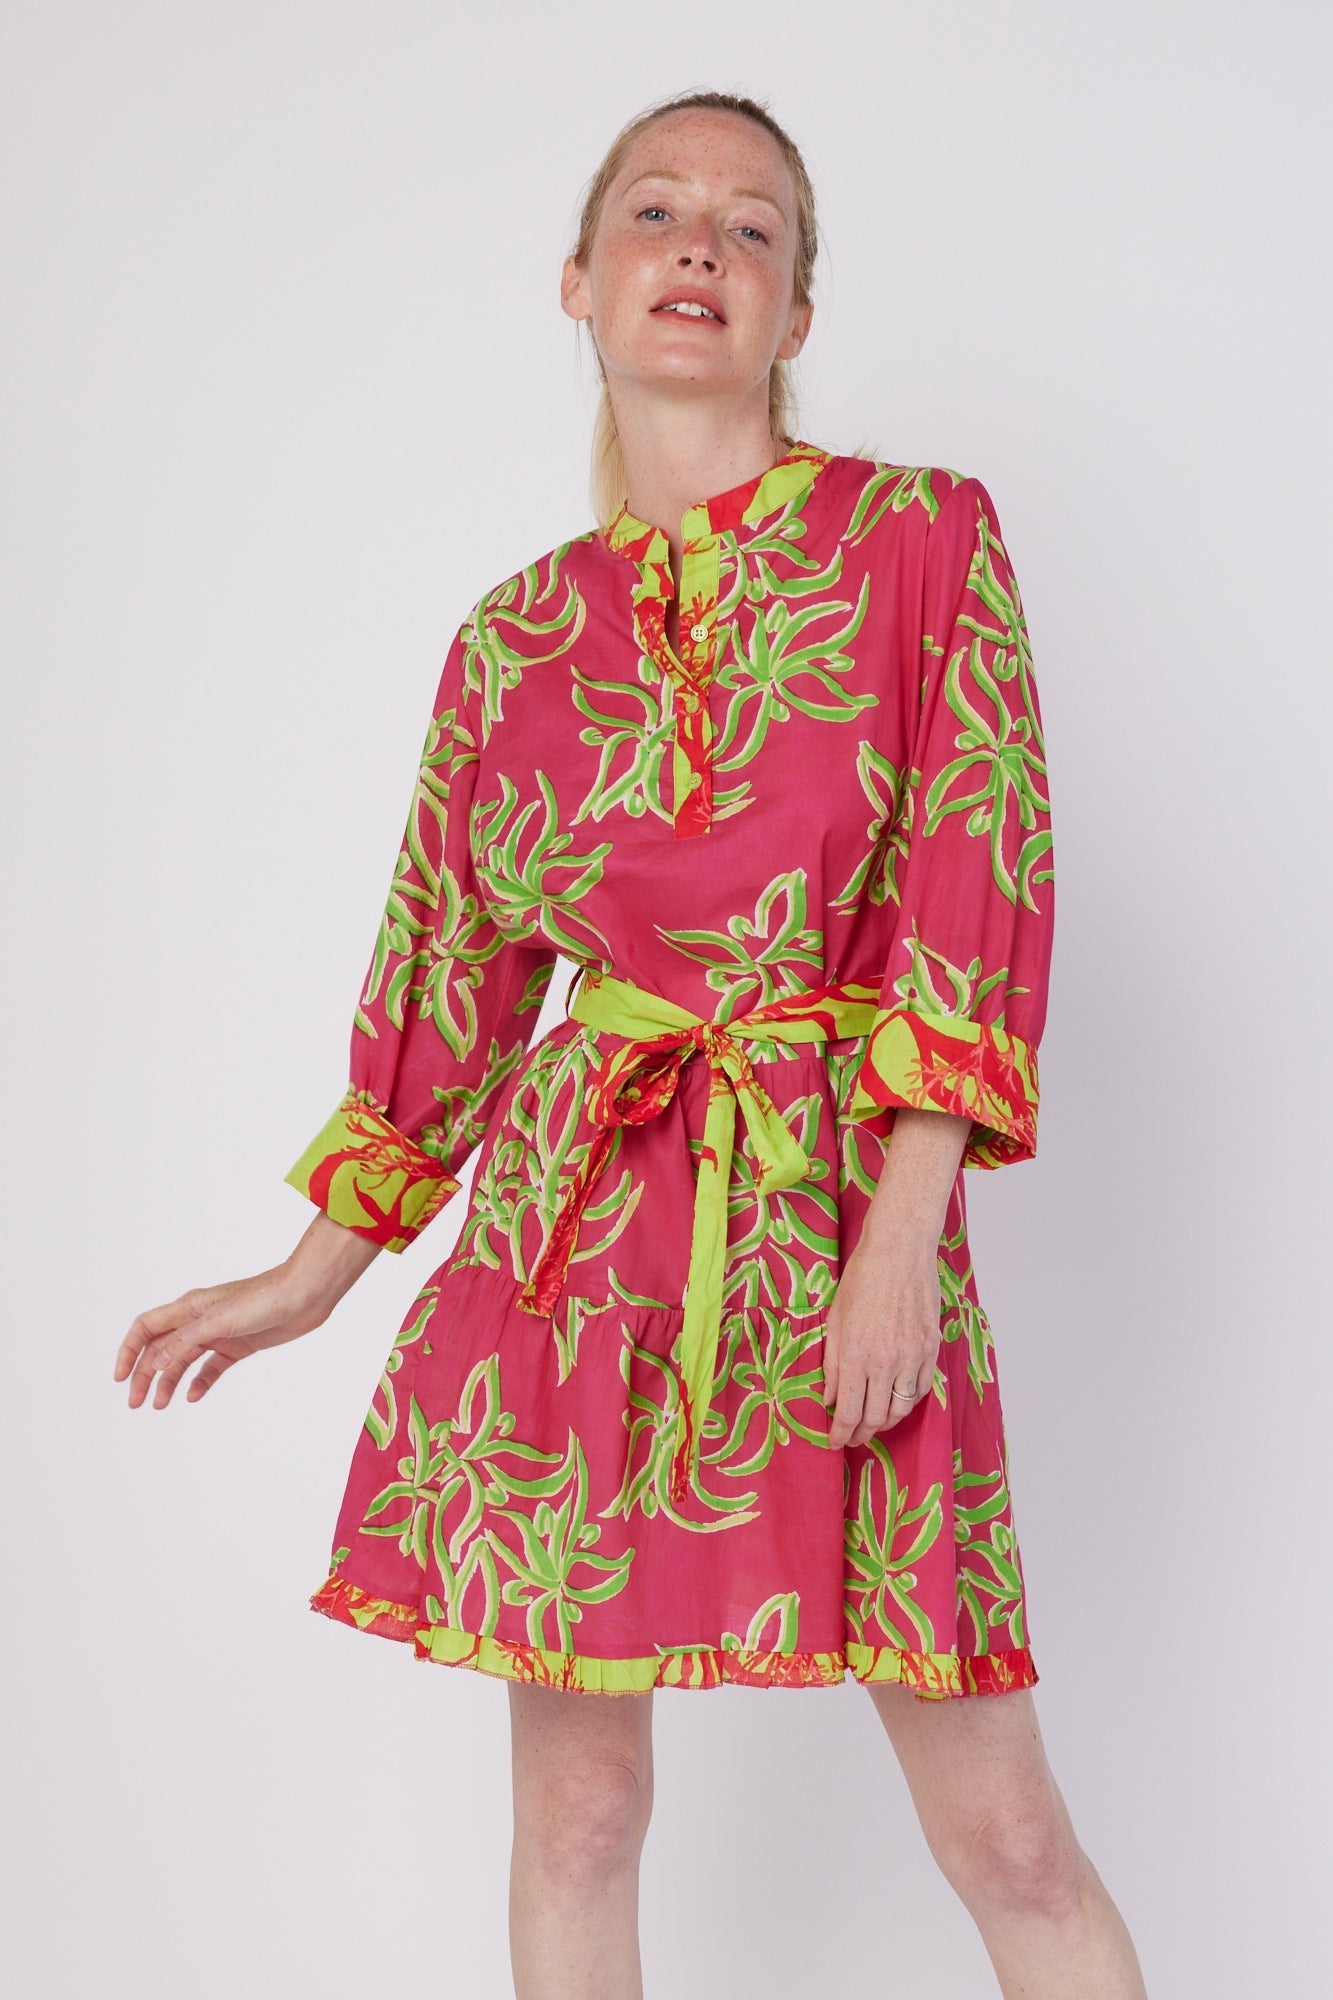 ModaPosa Alcee 3/4 Puff Sleeve Mini Dress with Detachable Belt in Raspberry Lime Combo . Discover women's resort dresses and lifestyle clothing inspired by the Mediterranean. Free worldwide shipping available!